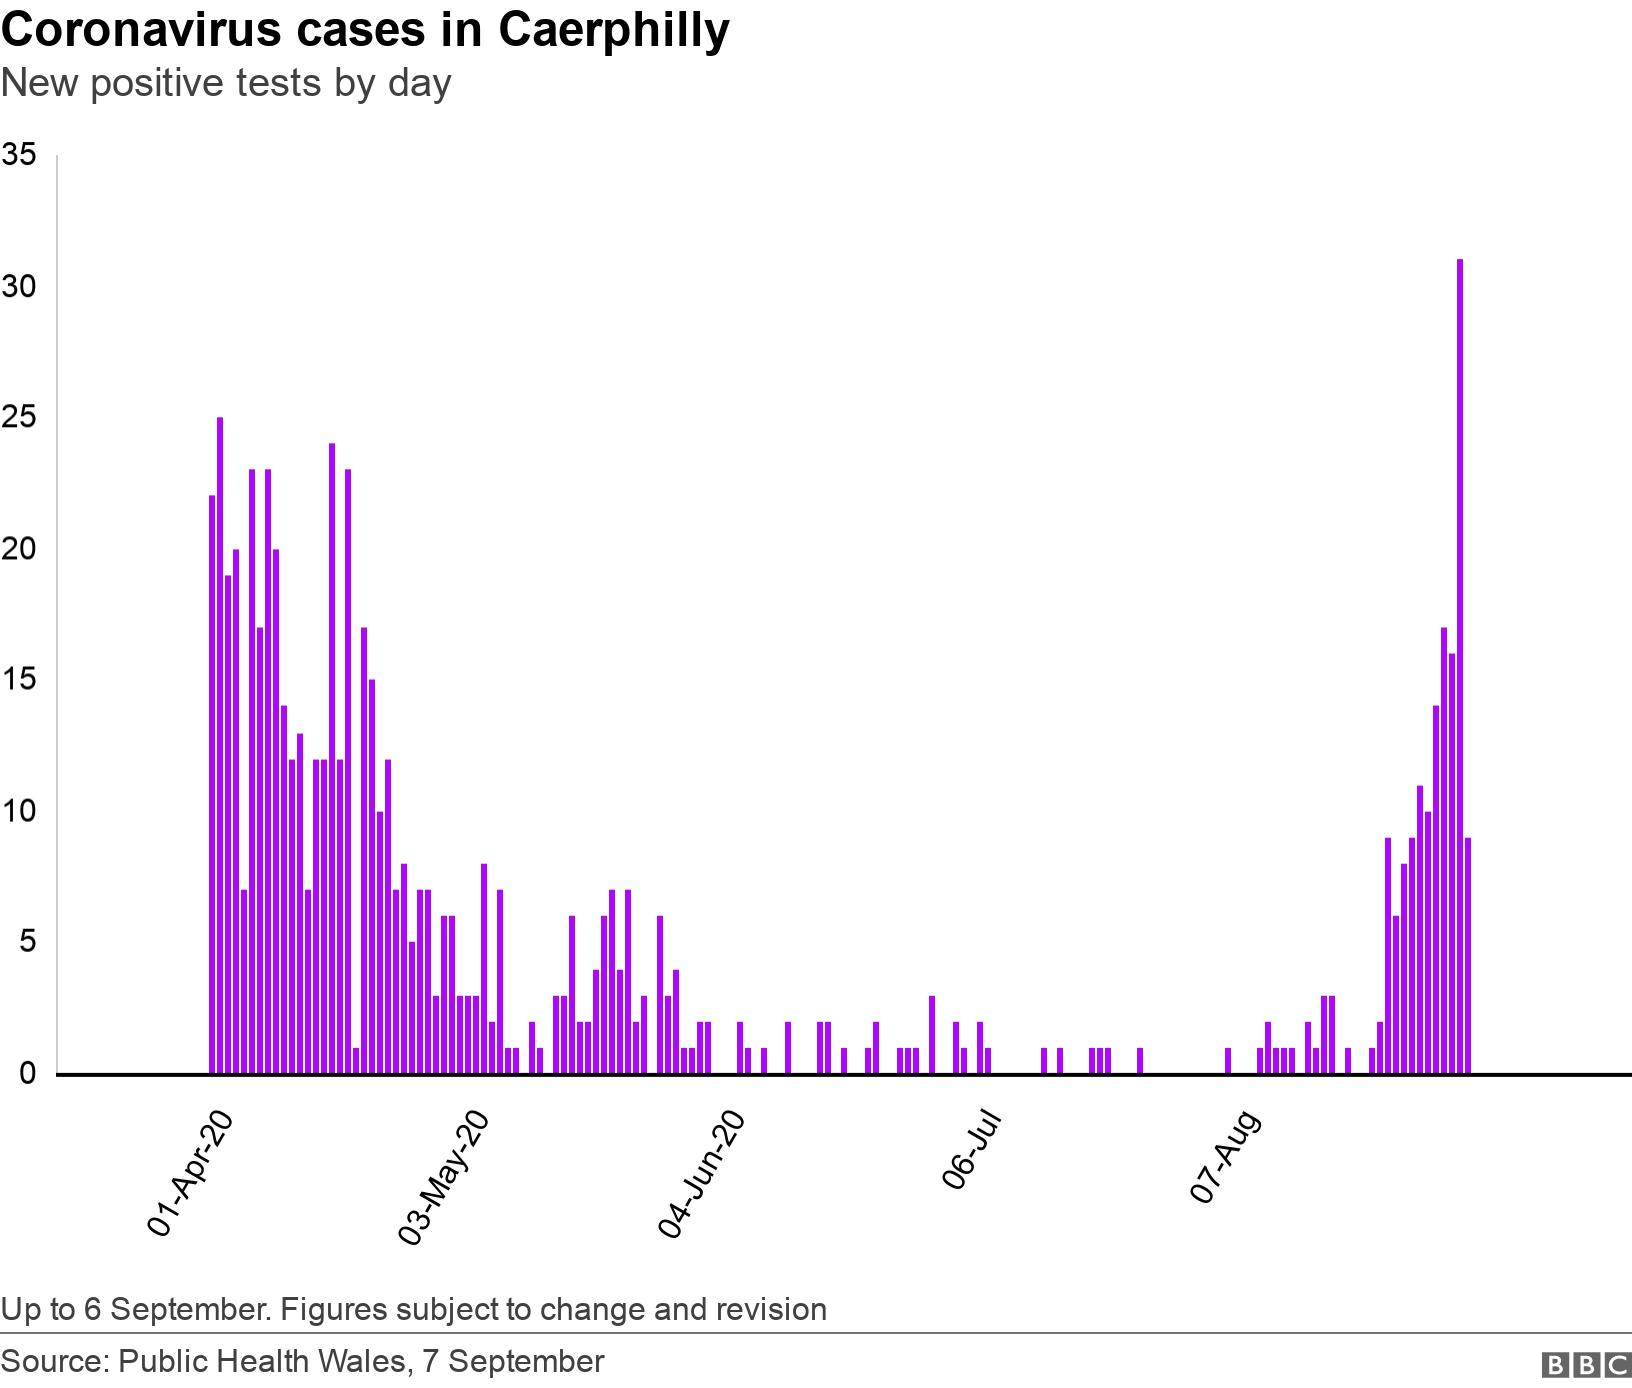 Coronavirus cases in Caerphilly. New positive tests by day. Up to 6 September. Figures subject to change and revision.